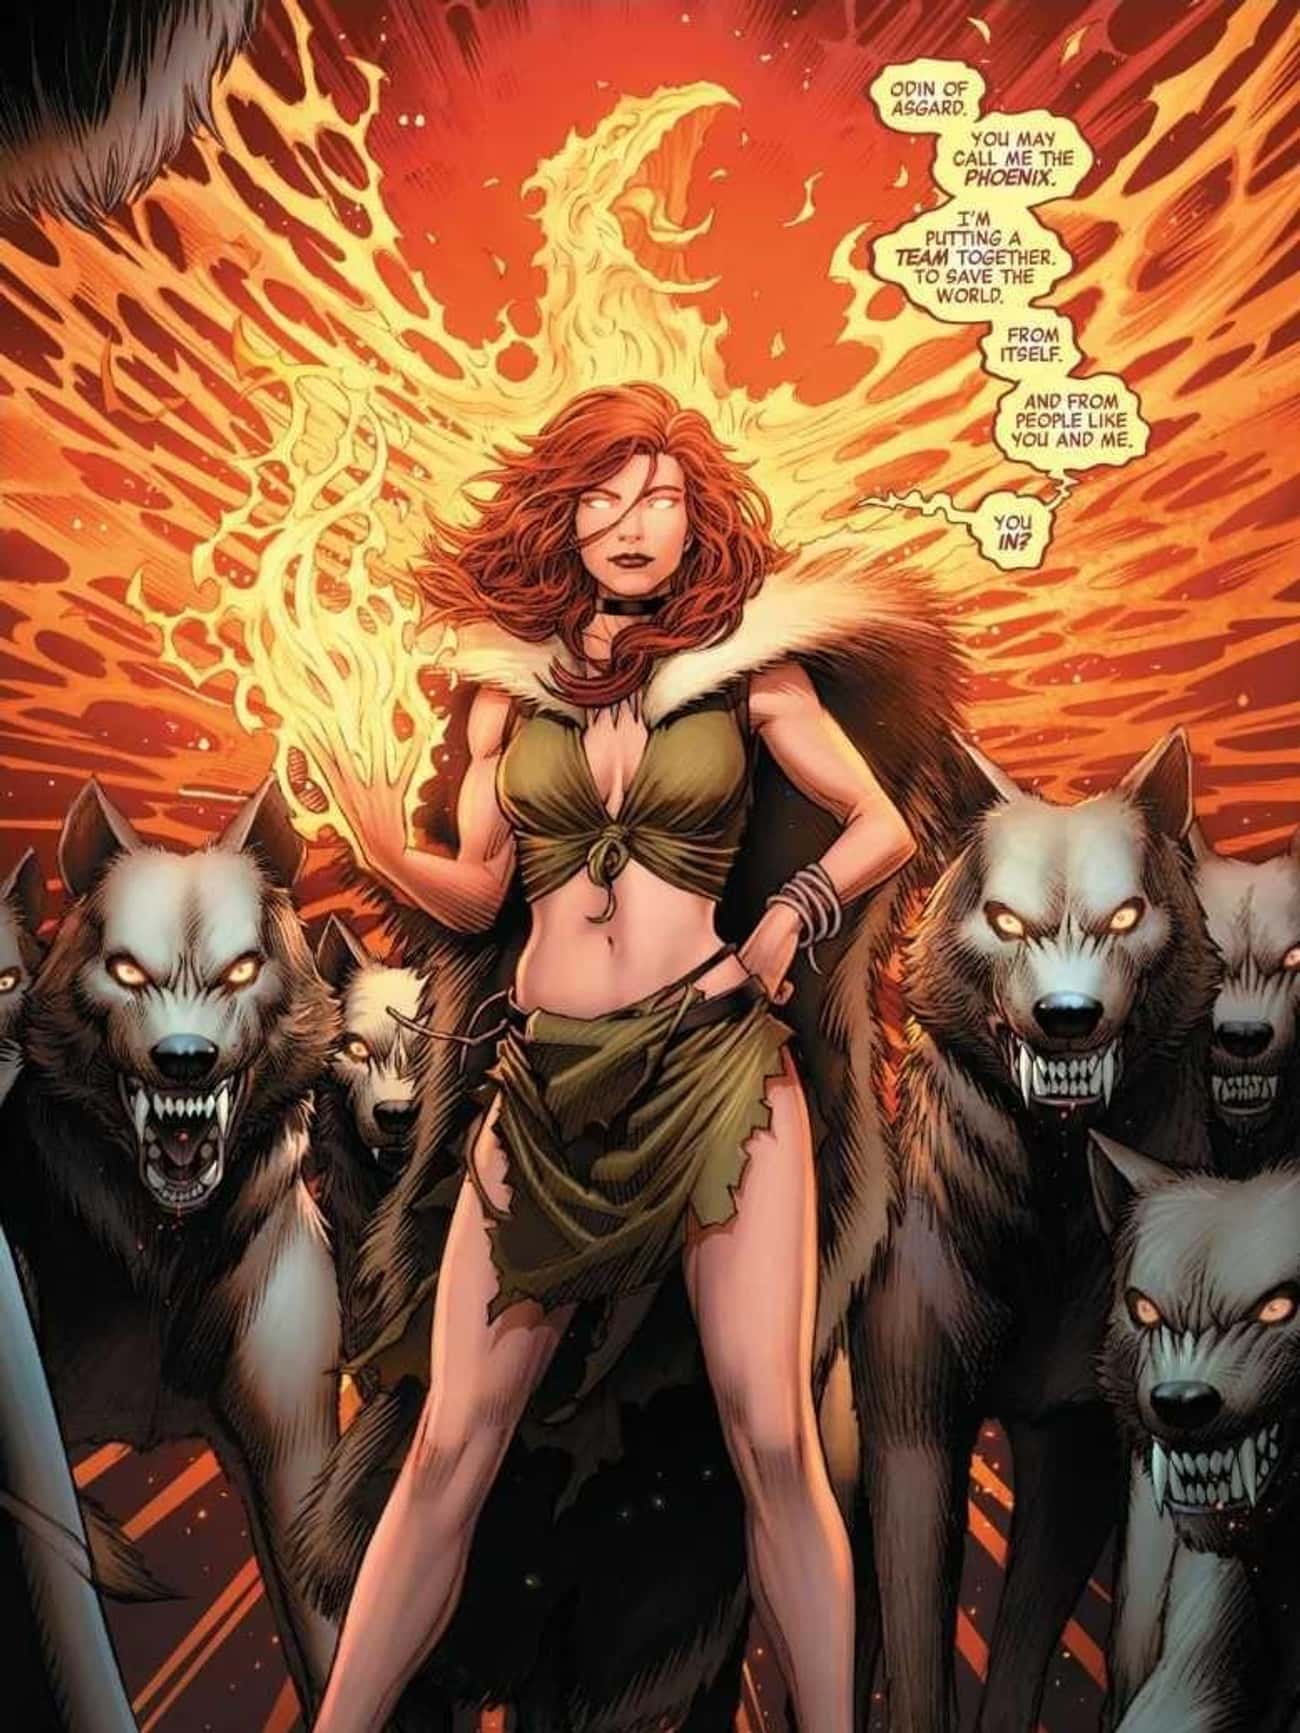 Firehair, The First Human To Host The Phoenix Force, Founded The Stone Age Avengers In The Year 1,000,000 BCE